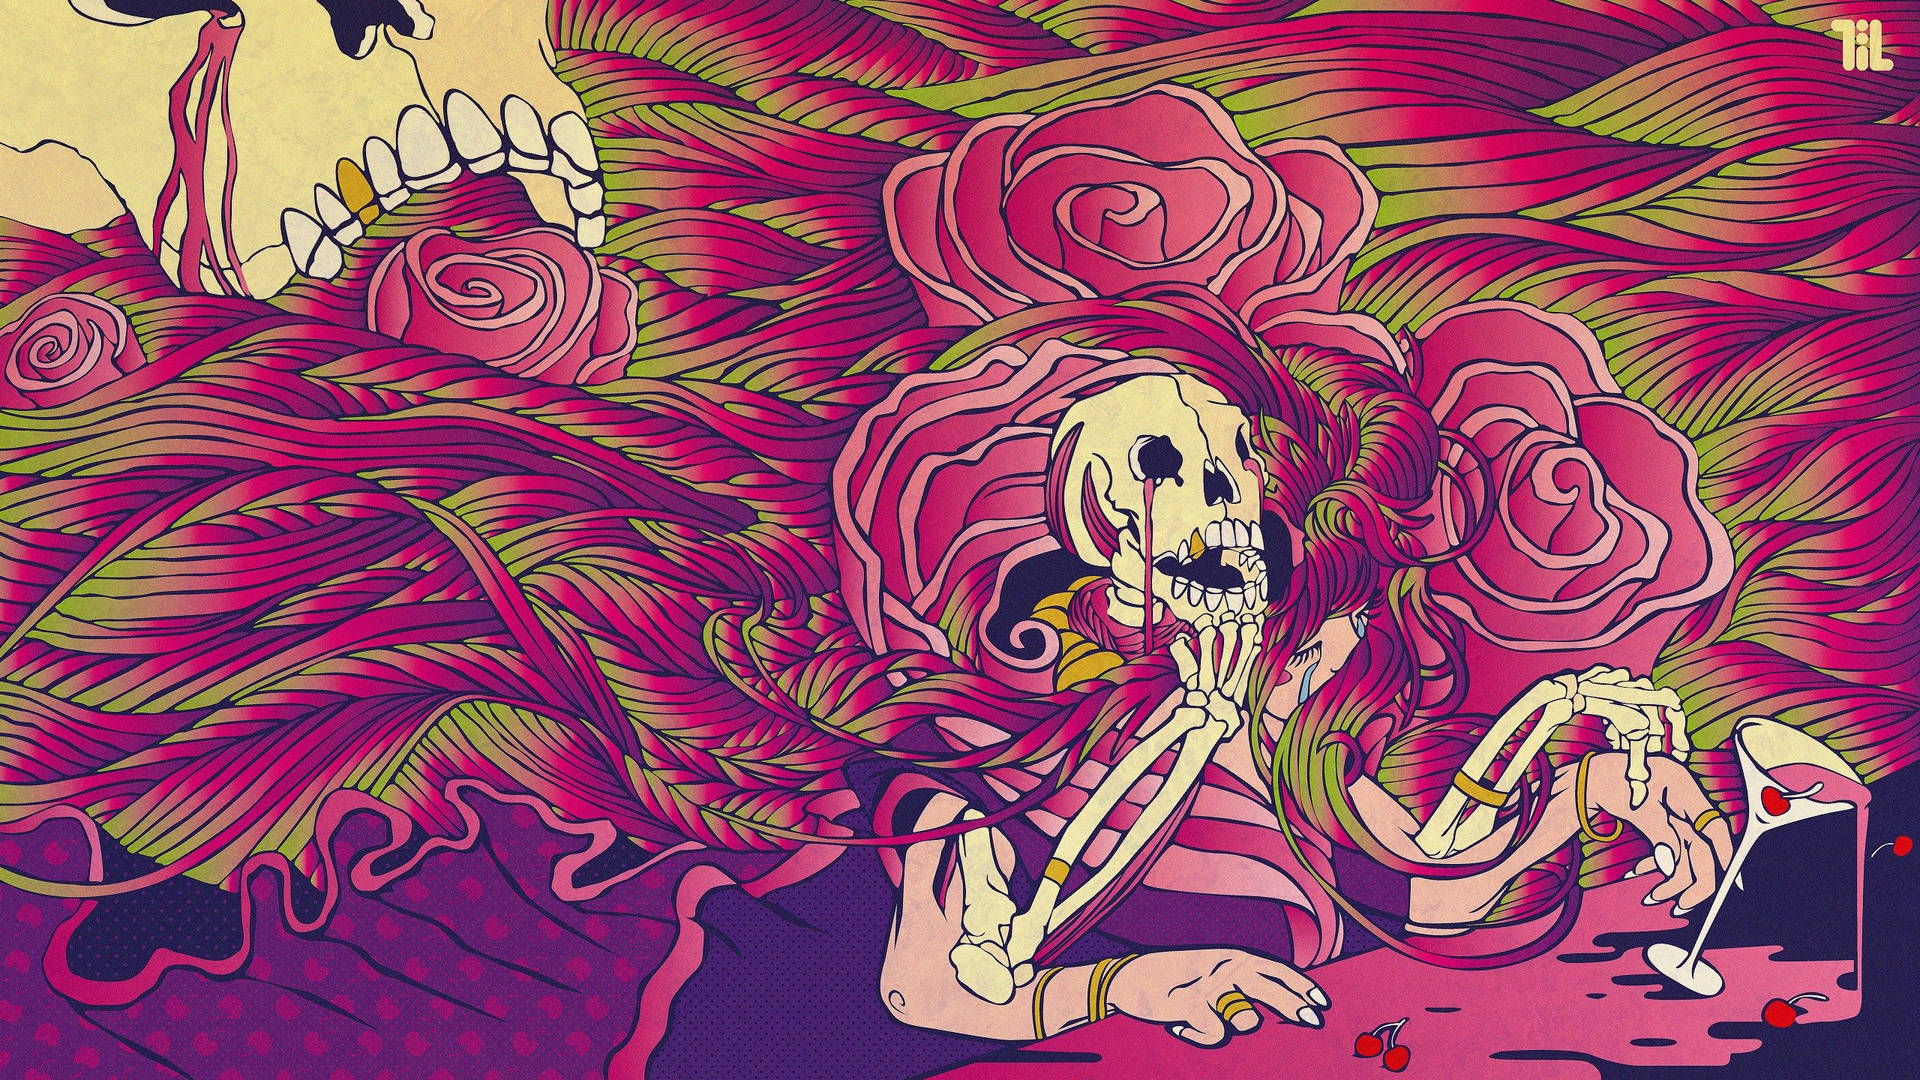 Psychedelic art of female skeleton drinking wine with pink roses wallpaper. 